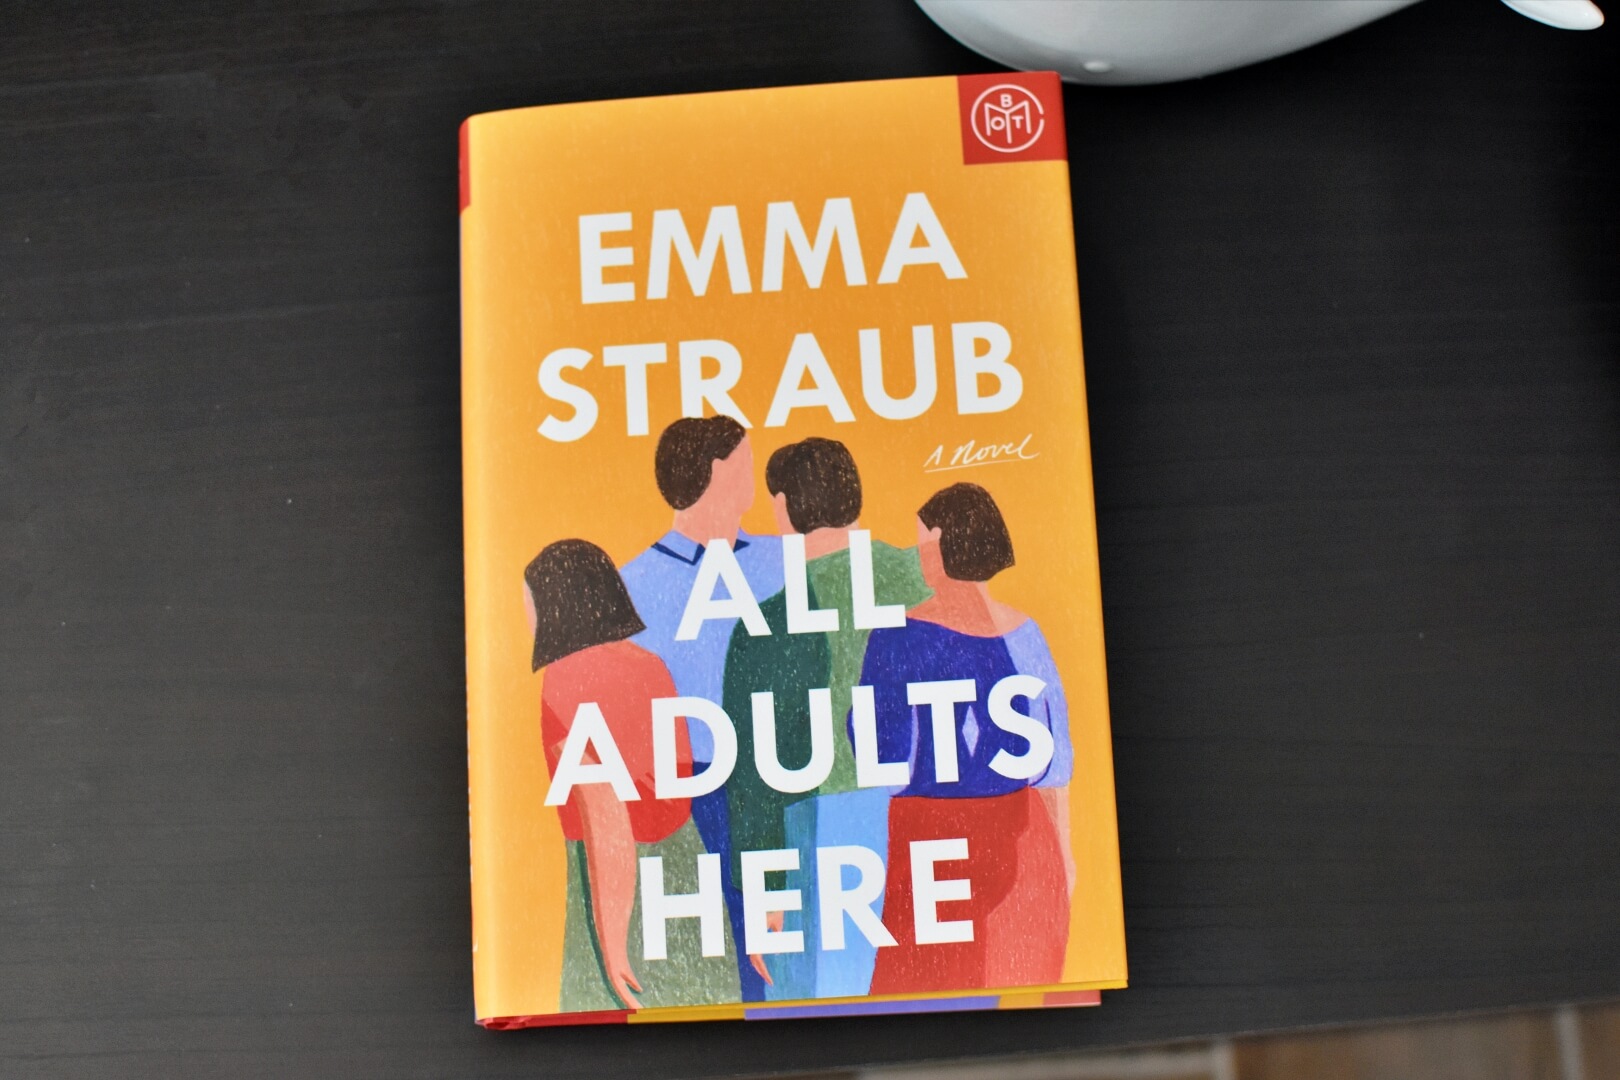 Review: All Adults Here by Emma Straub